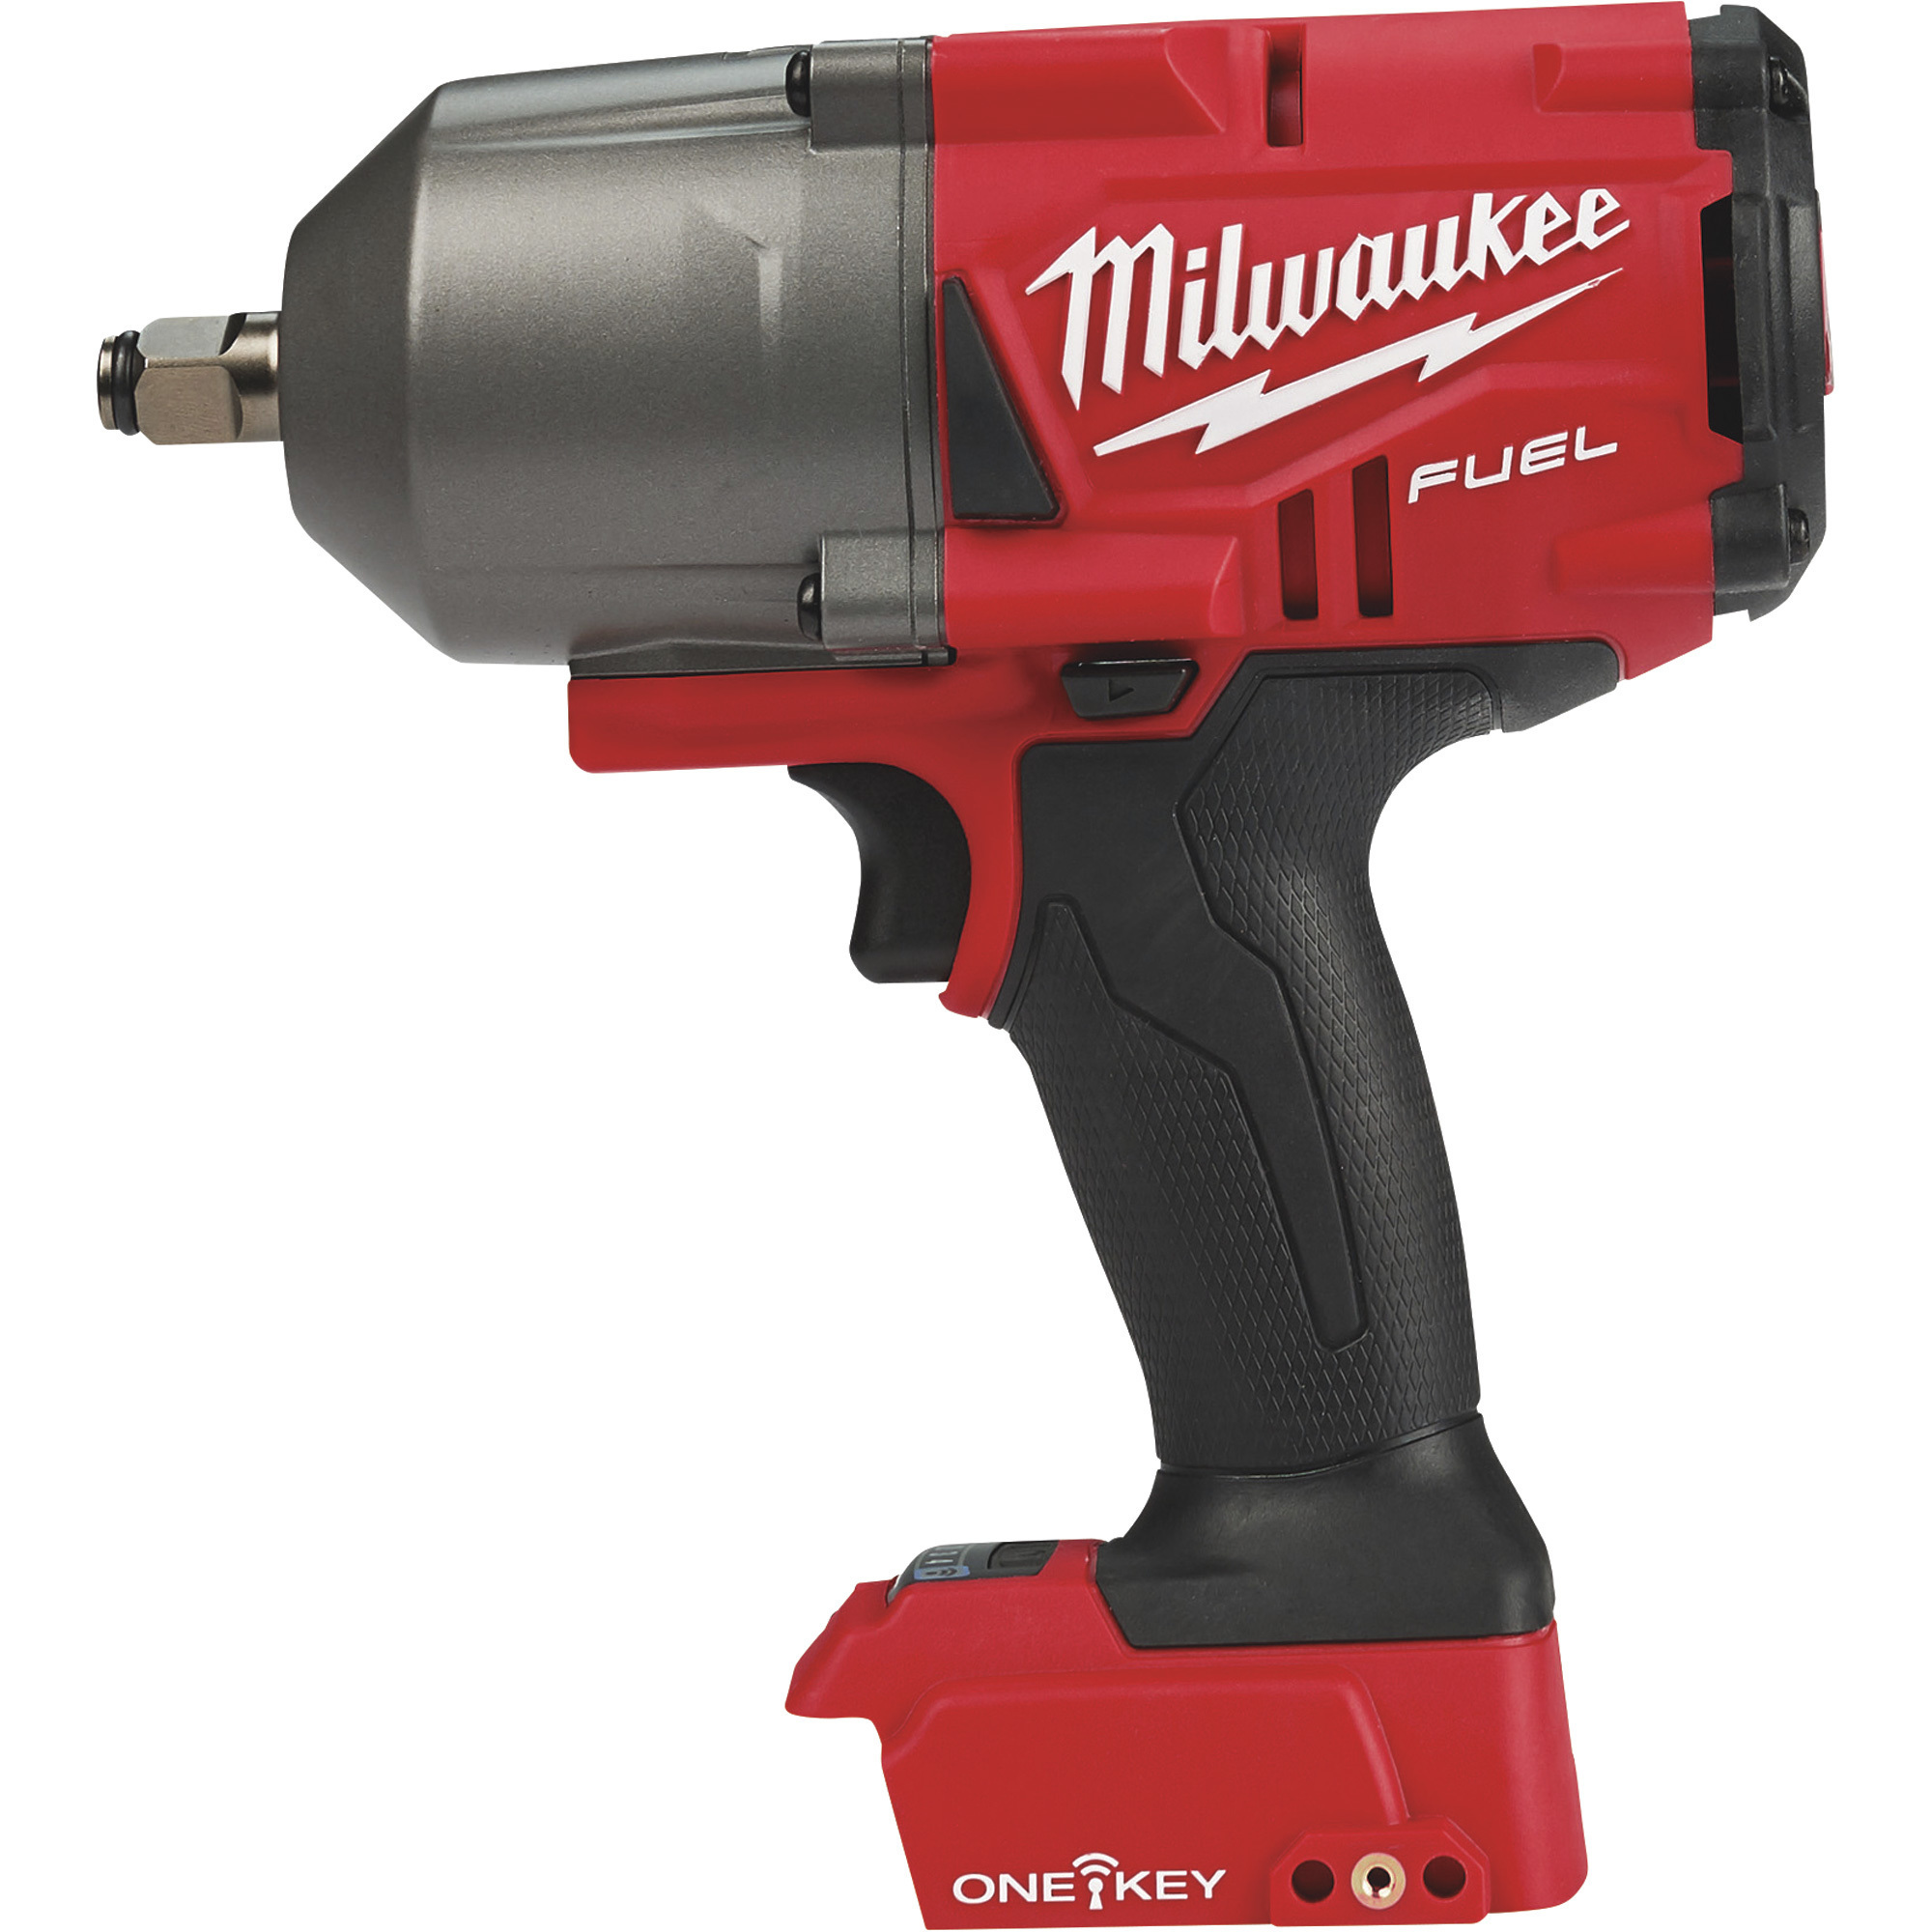 Milwaukee M18 FUEL with One-Key High-Torque Impact Wrench with Friction Ring Kit, Tool Only, 1/2Inch Drive, 1400 Ft./Lbs. Torque, Model 2863-20